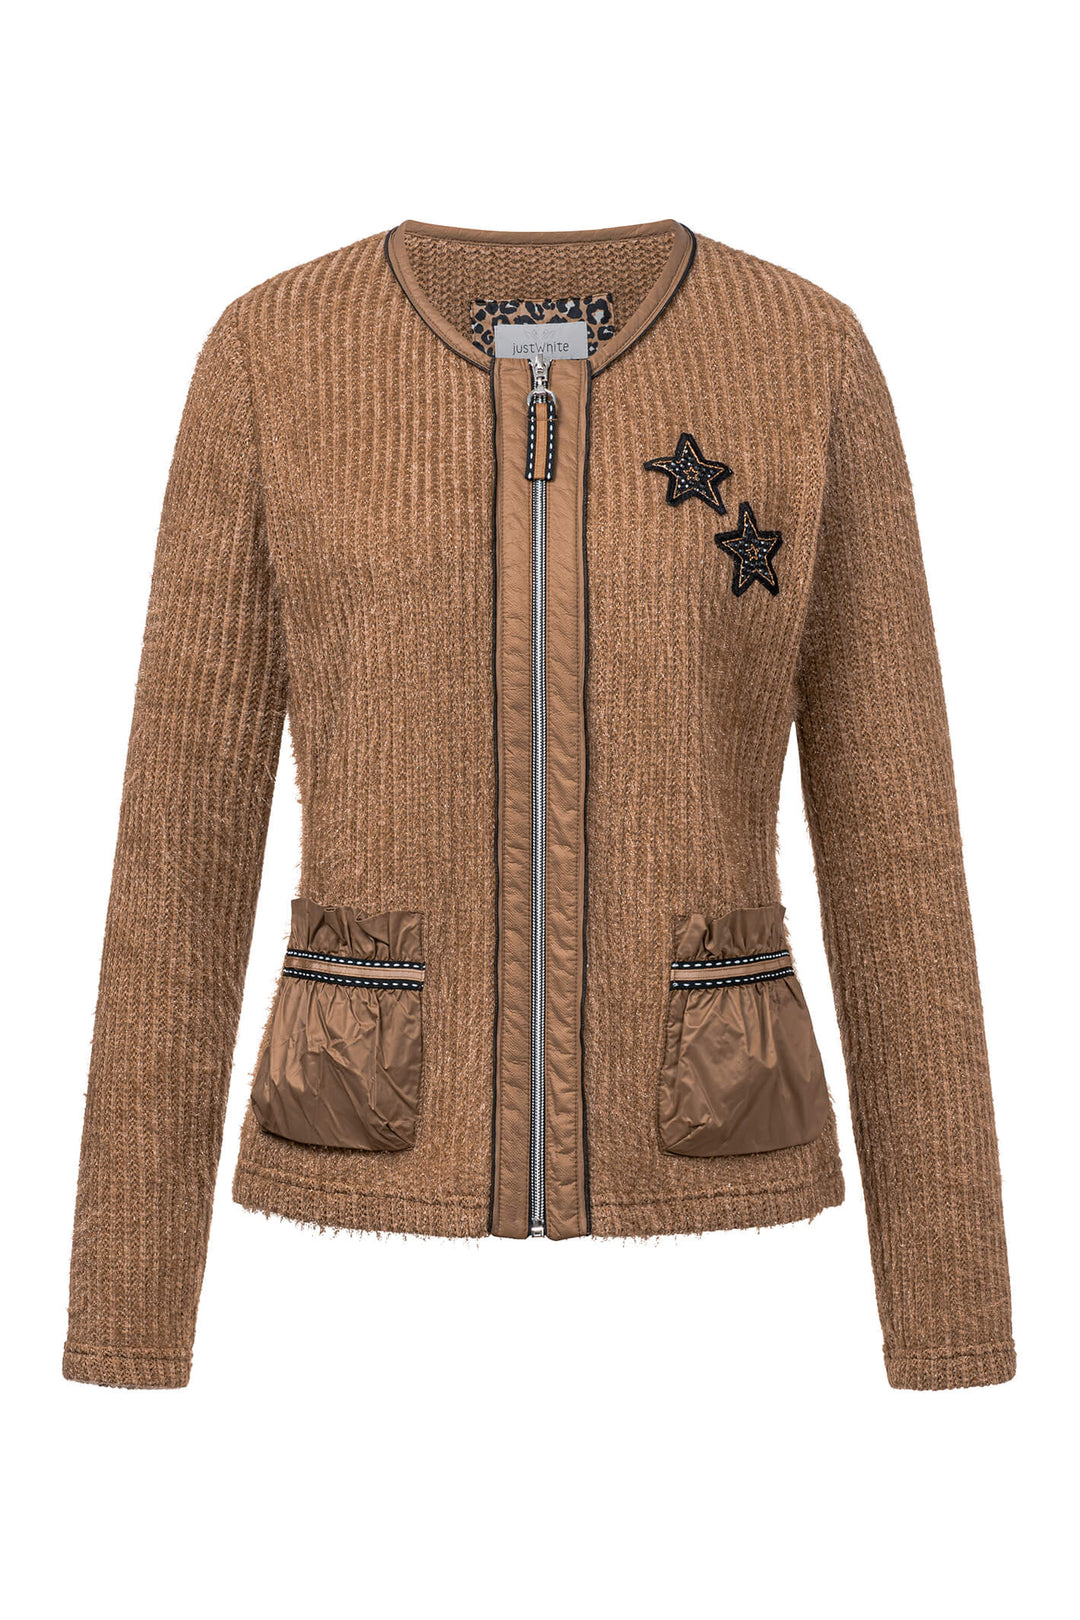 Just White J1129-840 Camel Uni Knitted Zip Front Jacket - Shirley Allum Boutique